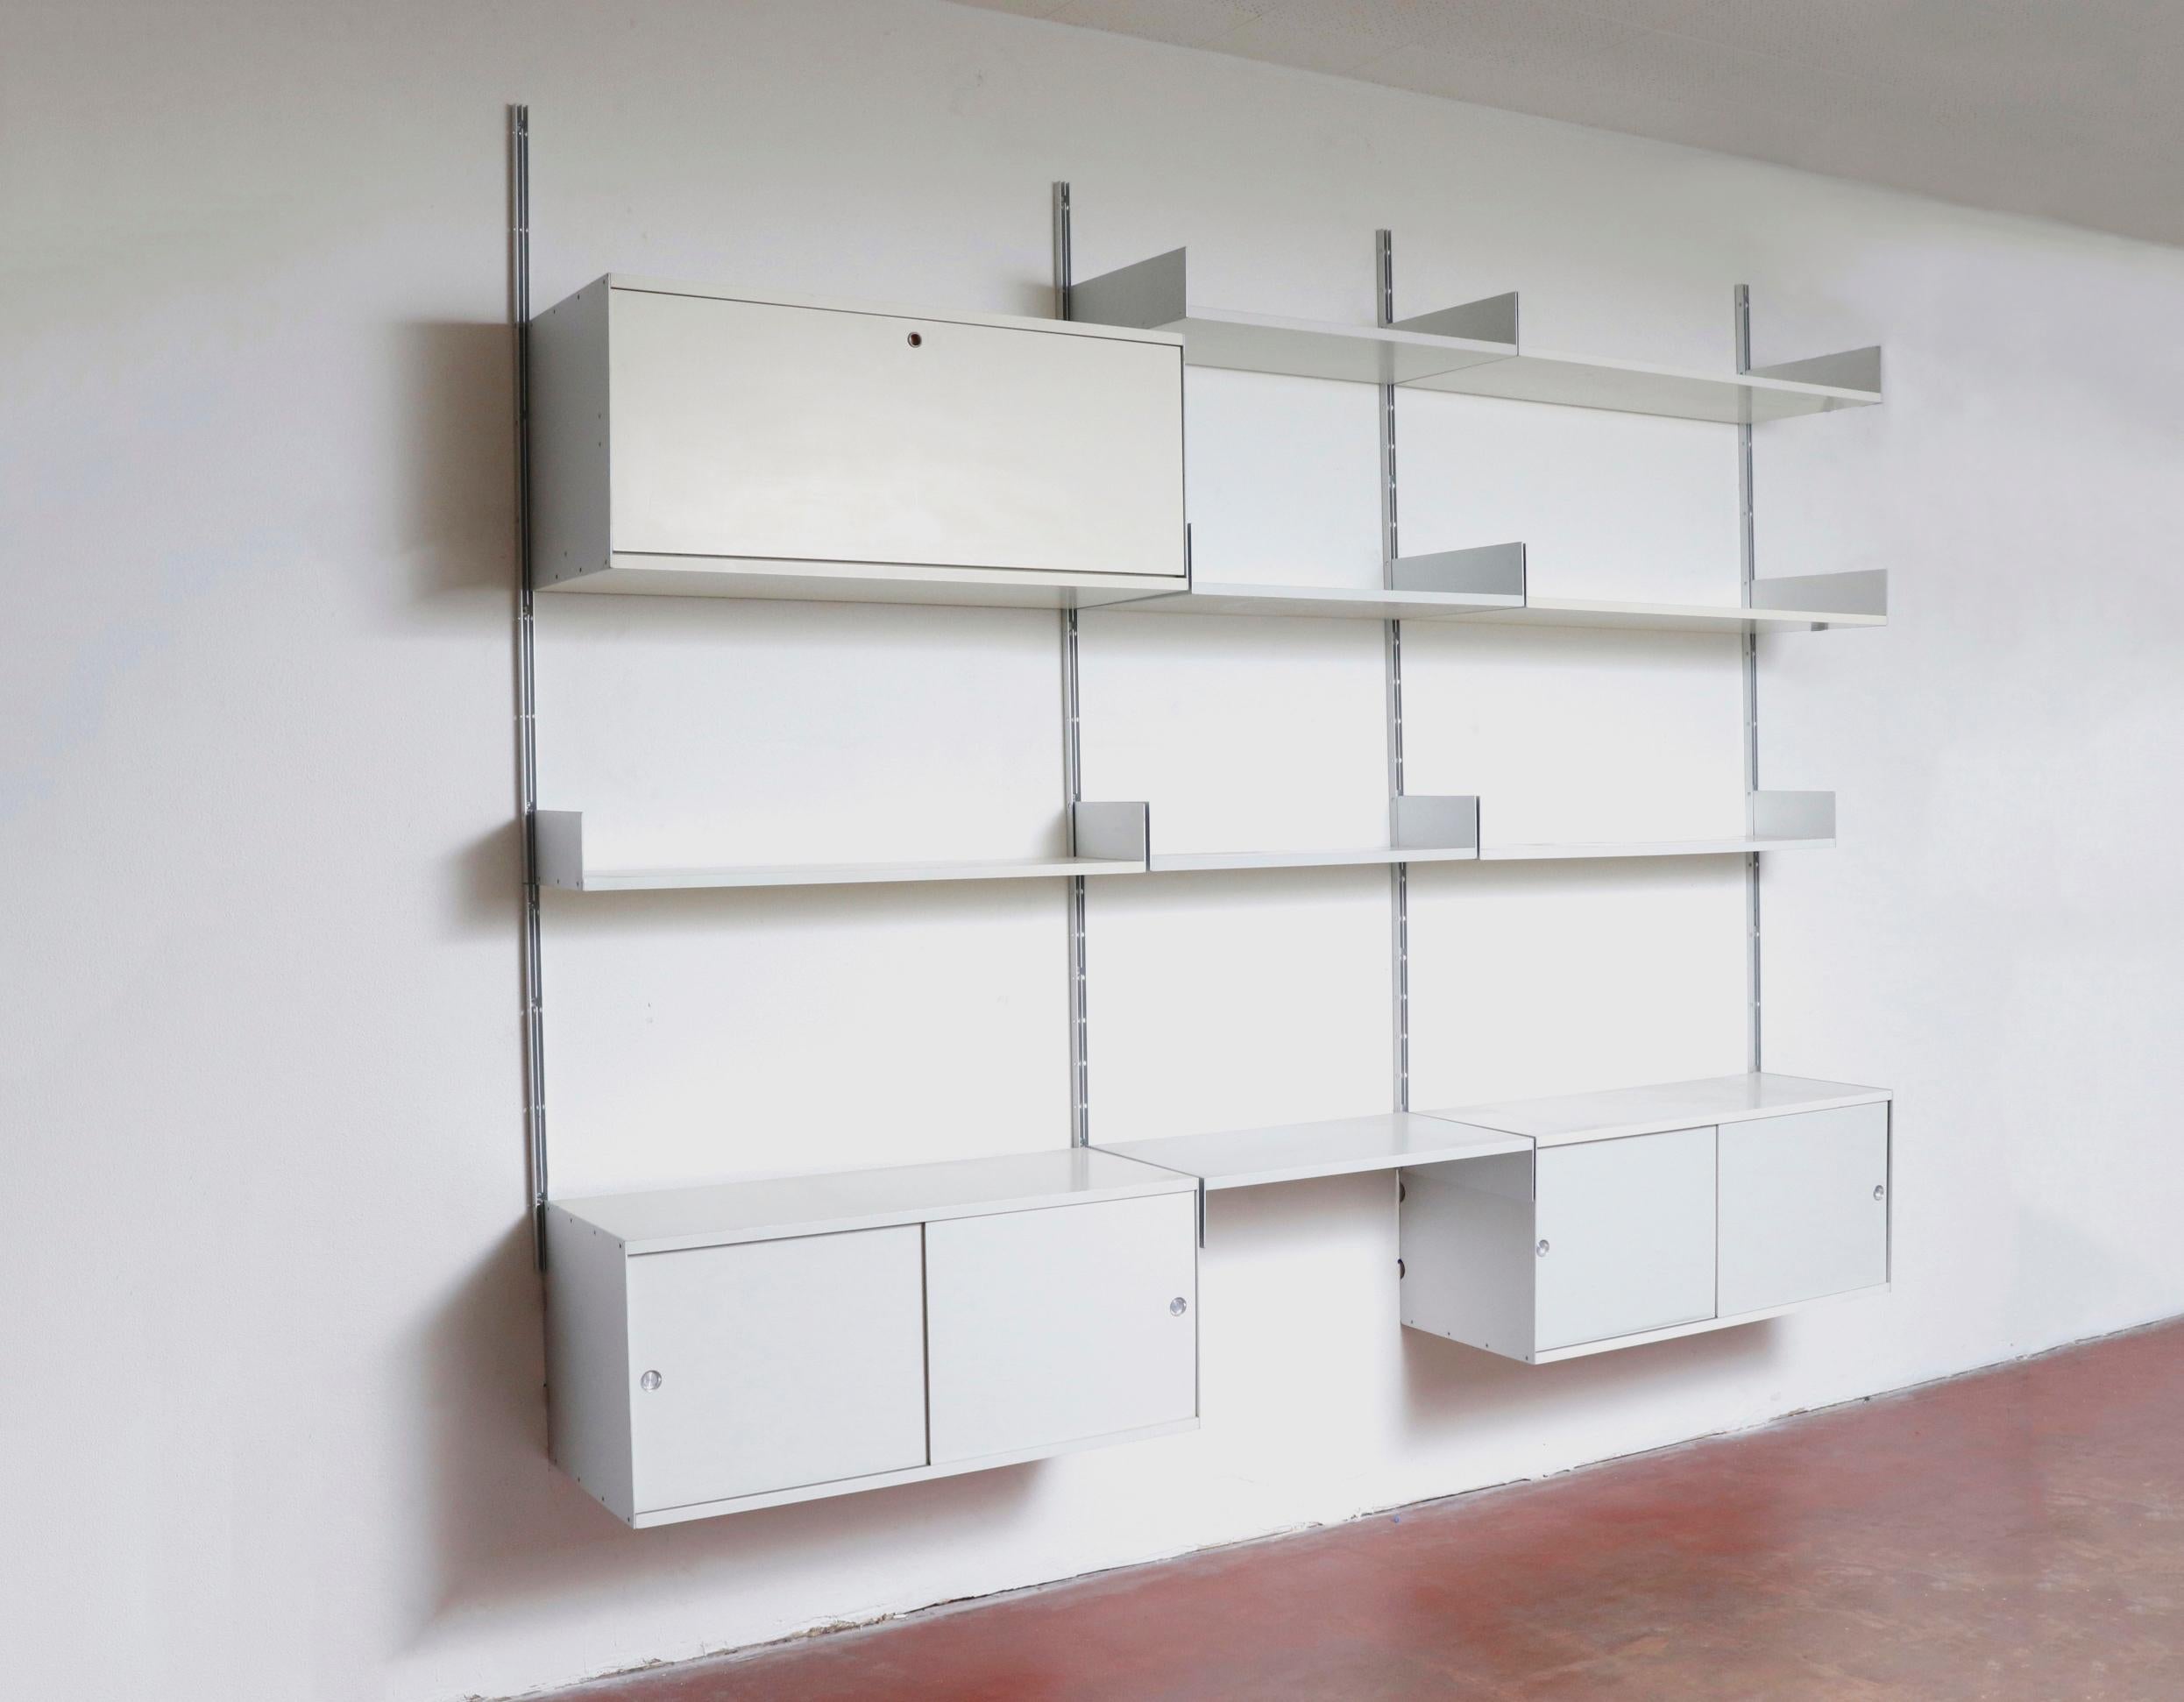 Rare 3 section Dieter Rams industrial shelving unit on aluminum risers with storage cabinets and 8 assorted shelves. Two cabinets with sliding doors, one with a drop-down door, and missing the lock. In original condition with visible wear. Wear is